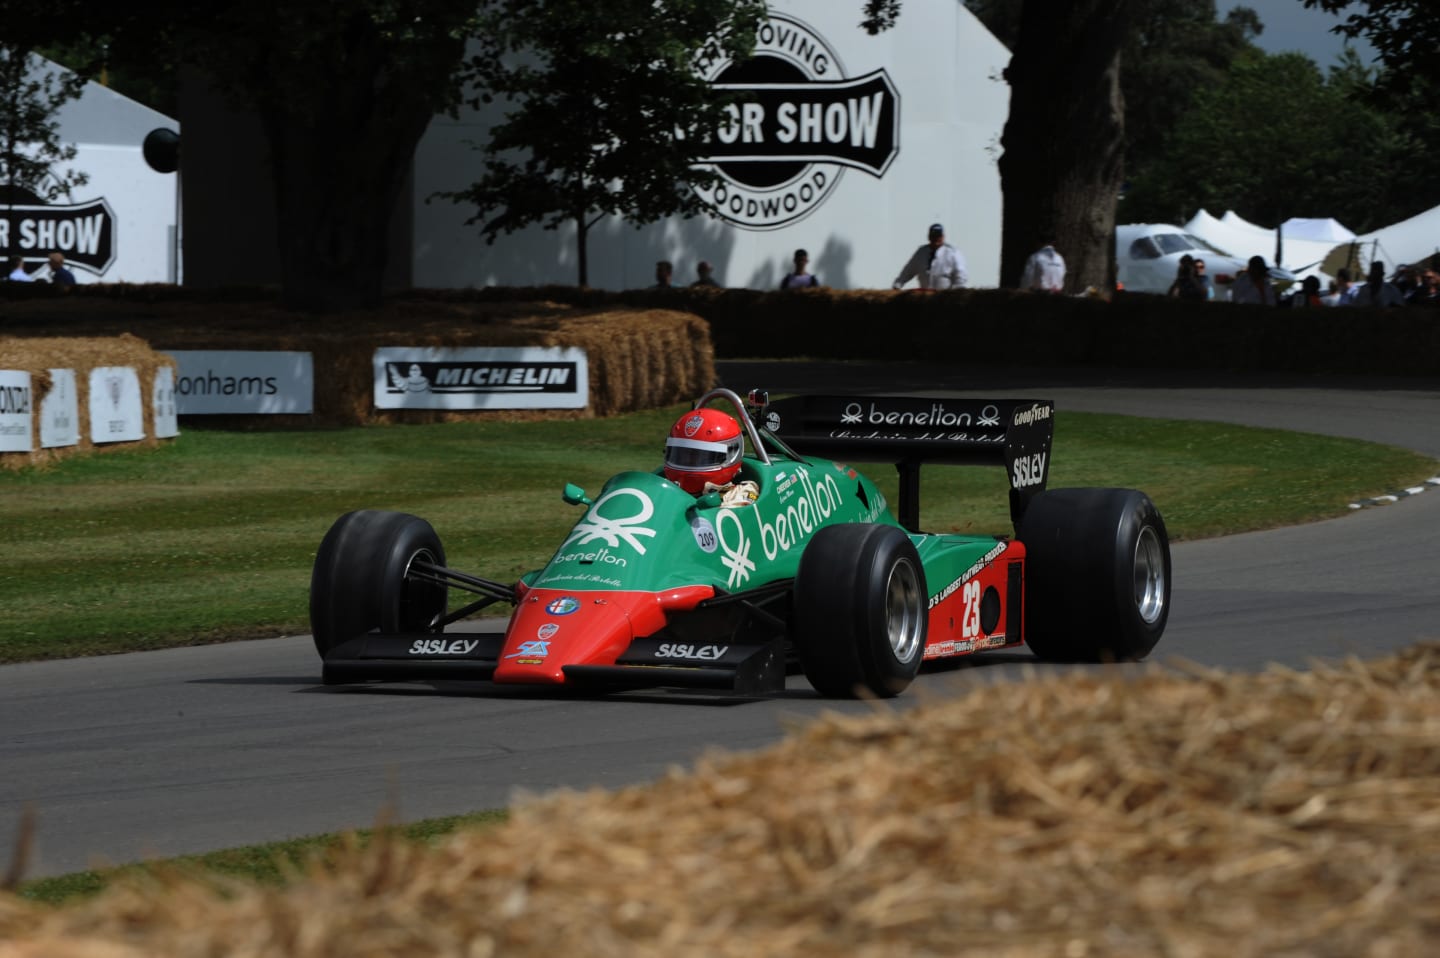 www.sutton-images.com Marco Cajani (ITA) Alfa Romeo 183T at Goodwood Festival of Speed, Goodwood, England, 30 June - 2 July 2017. © Sutton Images